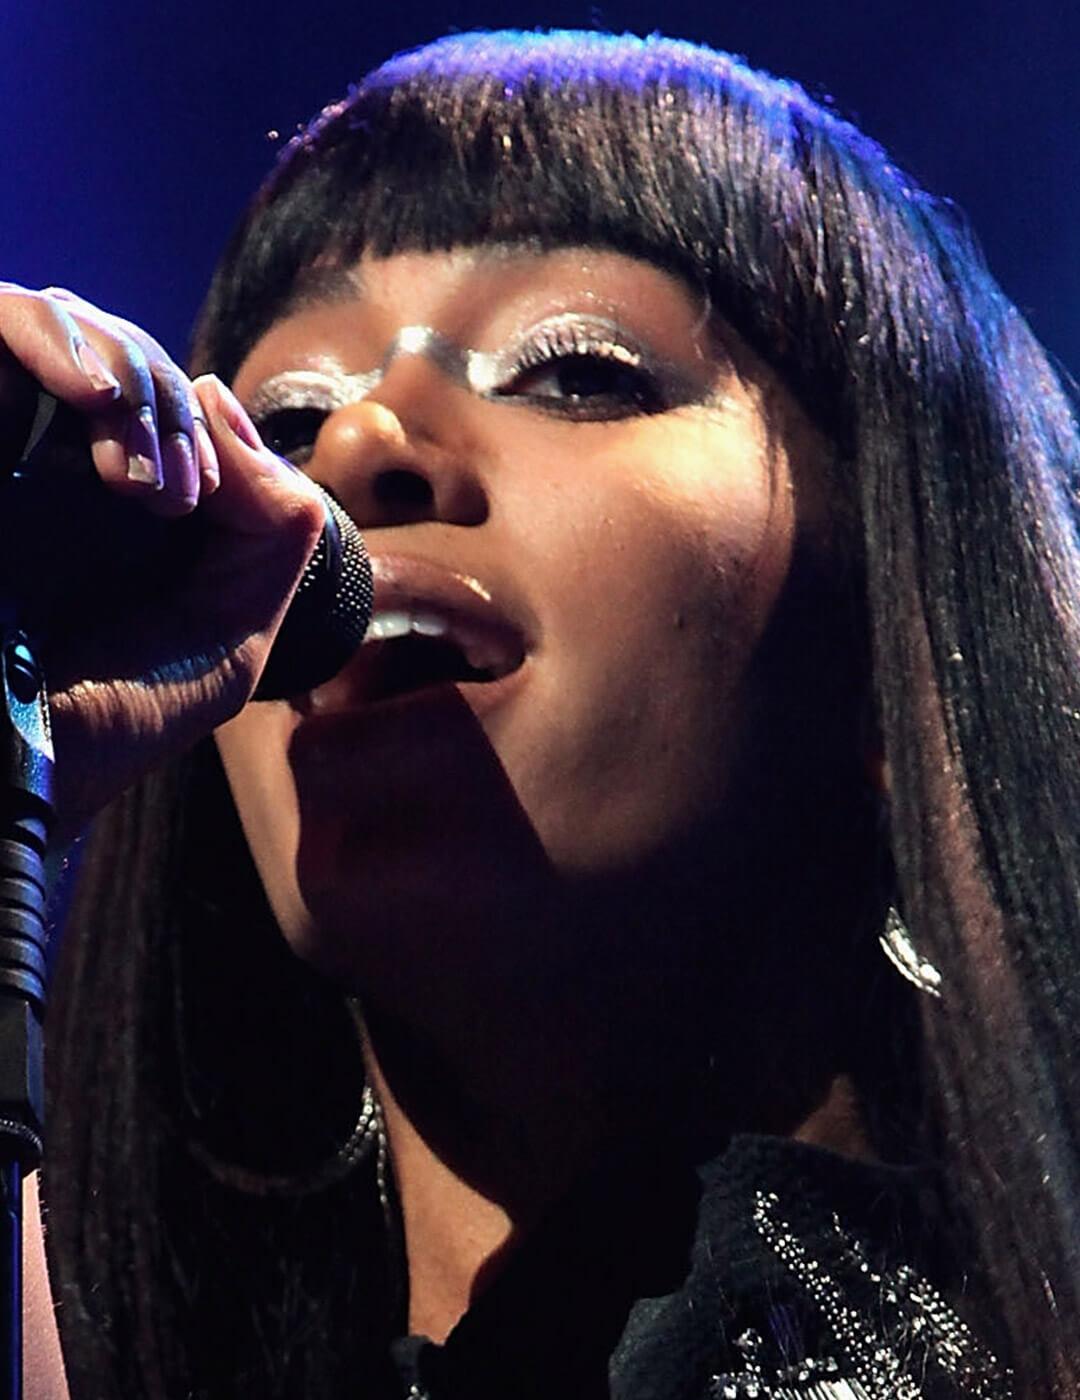 Solange Knowles performing and rocking a silver uni-liner makeup look